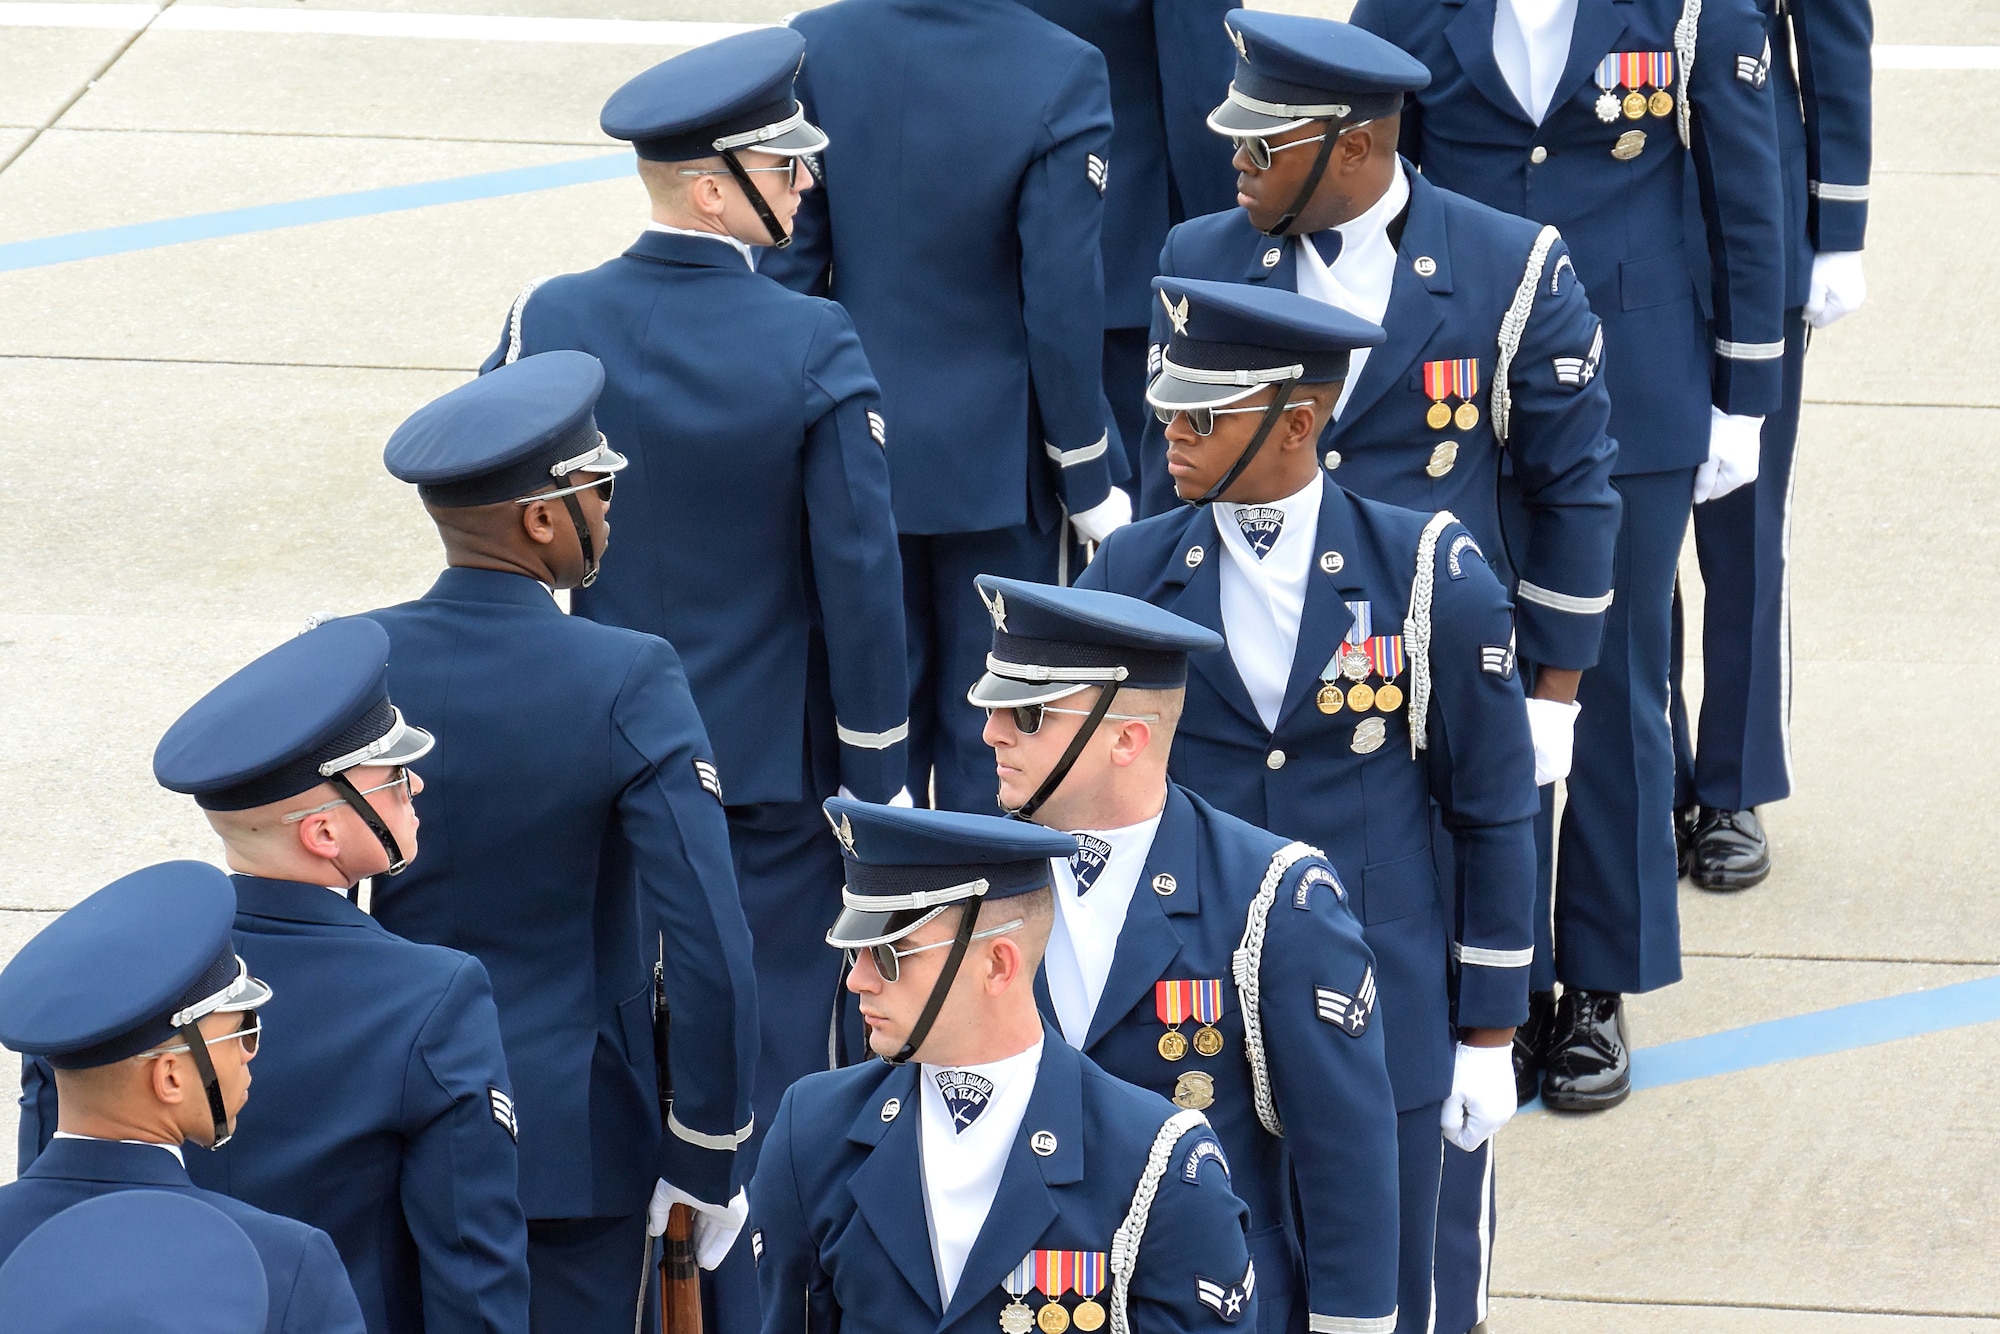 The U.S. Air Force Honor Guard Drill Team debuts their 2019 routine in front of Keesler leadership and 81st Training Group Airmen on the Levitow Training Support Facility drill pad at Keesler Air Force Base, Mississippi, Feb. 8, 2019. They are the nation's most elite honor guard, serving the President of the United States, the Air Force's most senior leaders and performing nationwide for the American public. The team comes to Keesler every year for five weeks to develop a new routine that they will use throughout the year. (U.S. Air Force photo by 2nd Lt. Jantzen Floate)